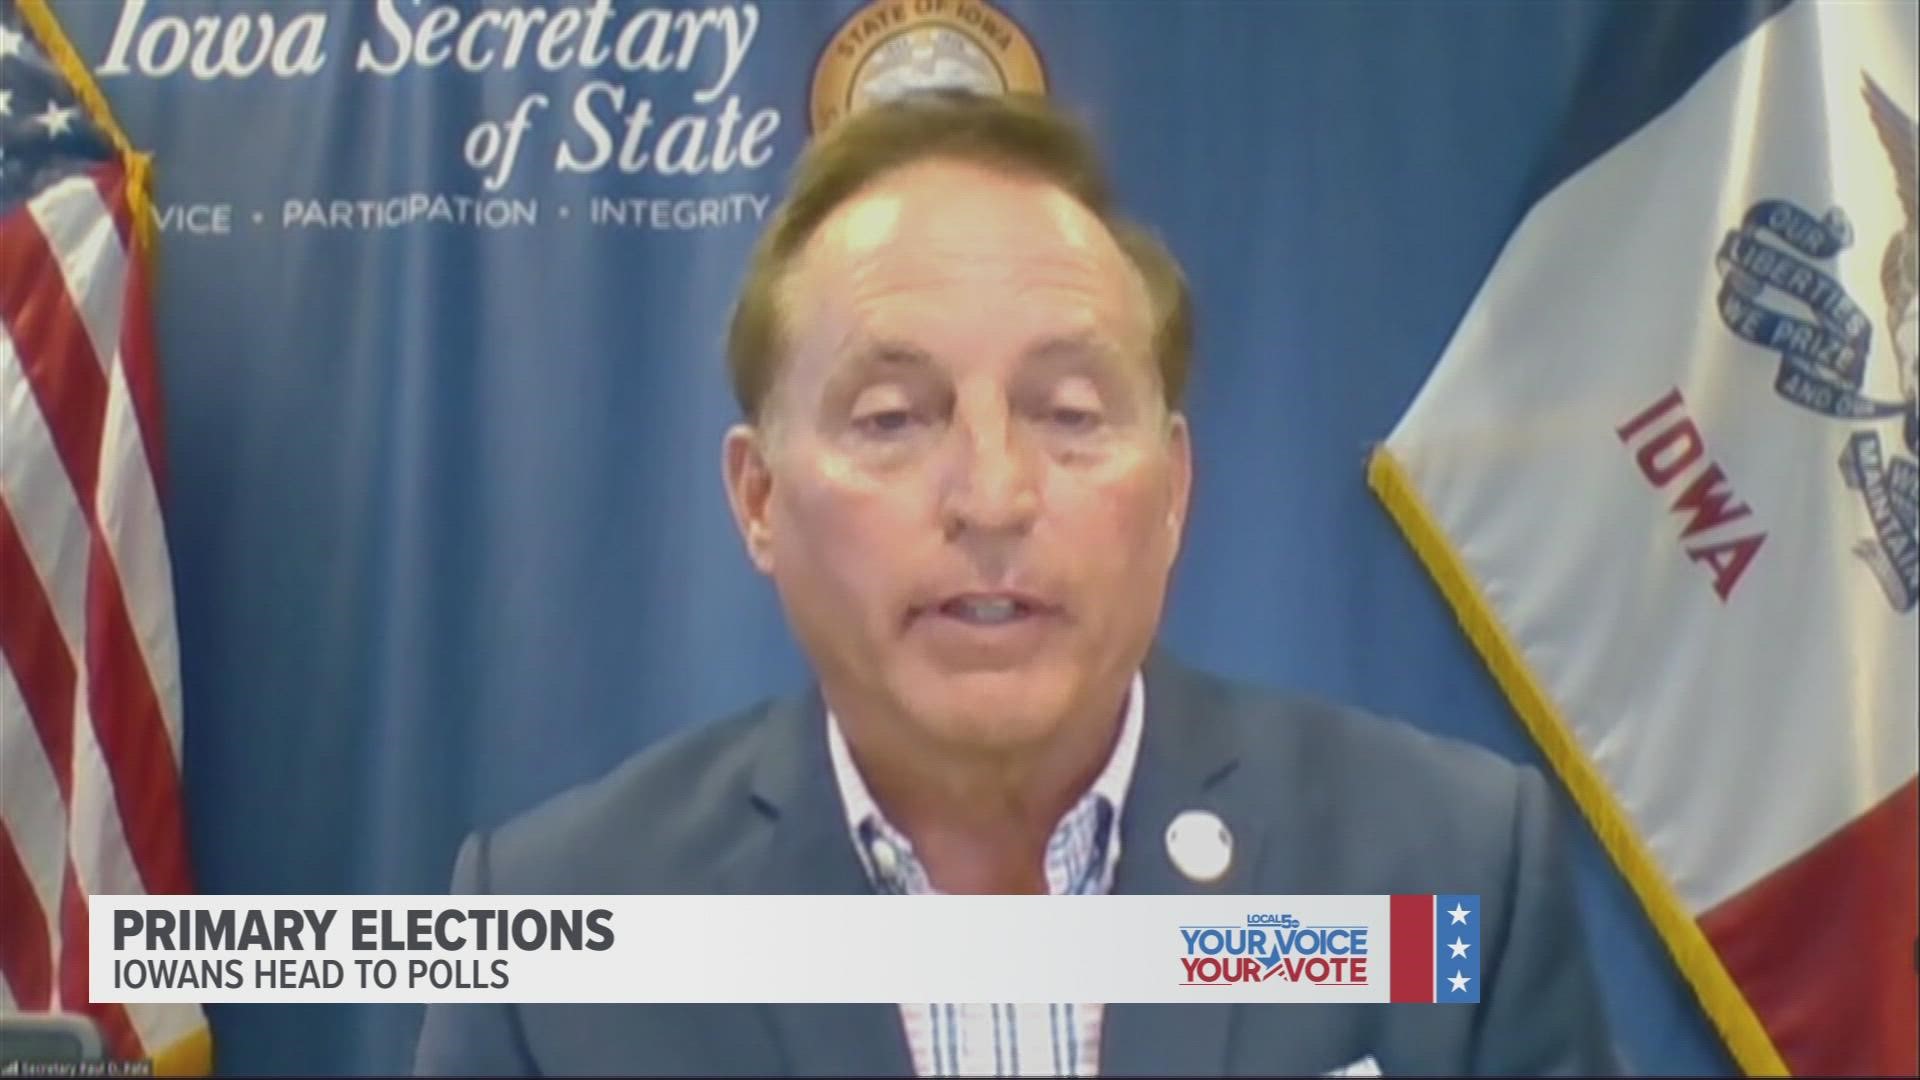 Iowa Secretary of State Paul Pate explains what measures his office has taken to secure this election, including voter ID laws and paper ballots.